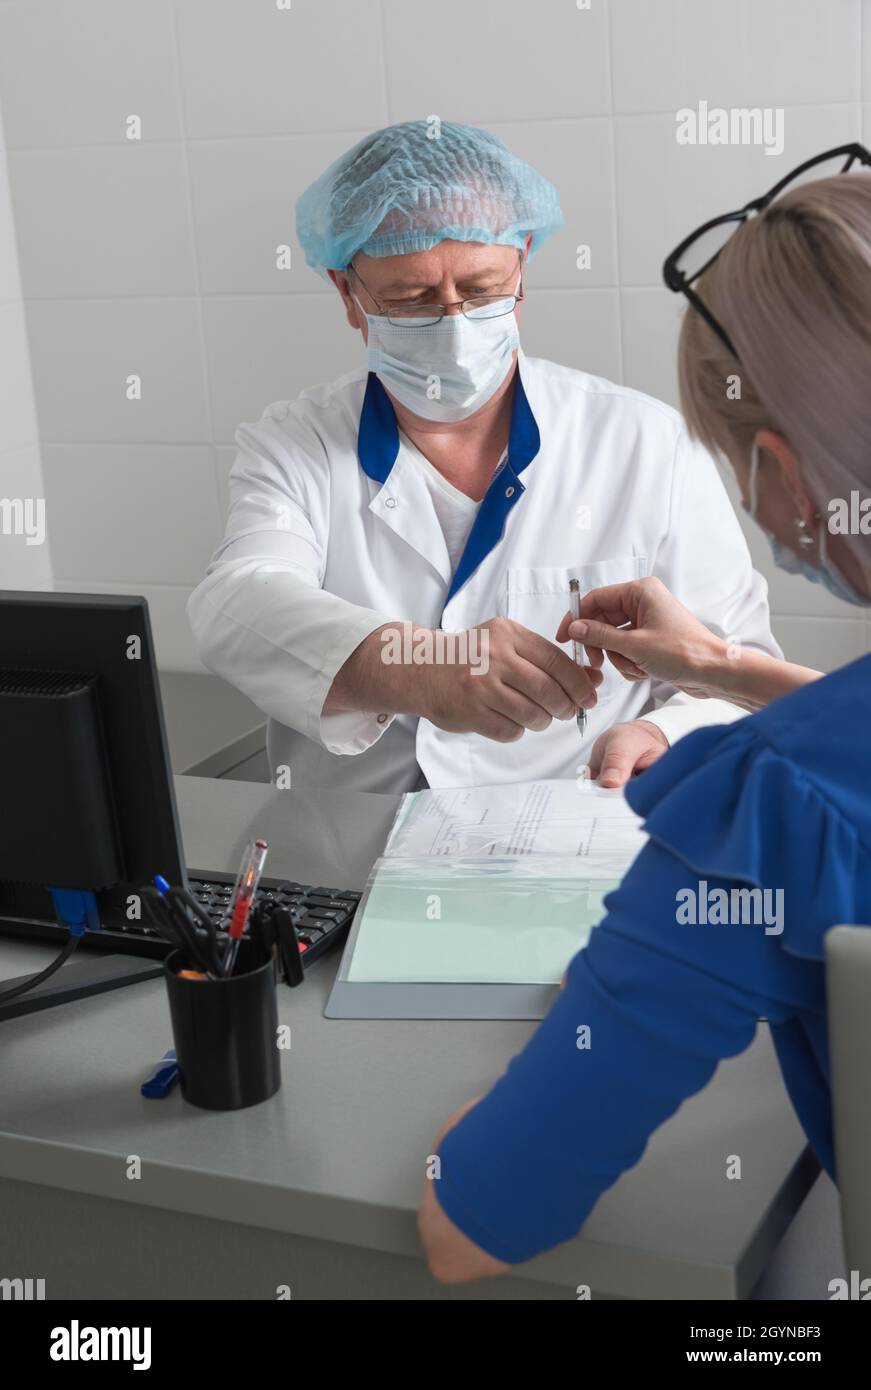 A doctor in a white coat, mask and cap in a medical office sitting at a table gives a pen to a patient to sign an informed consent Stock Photo